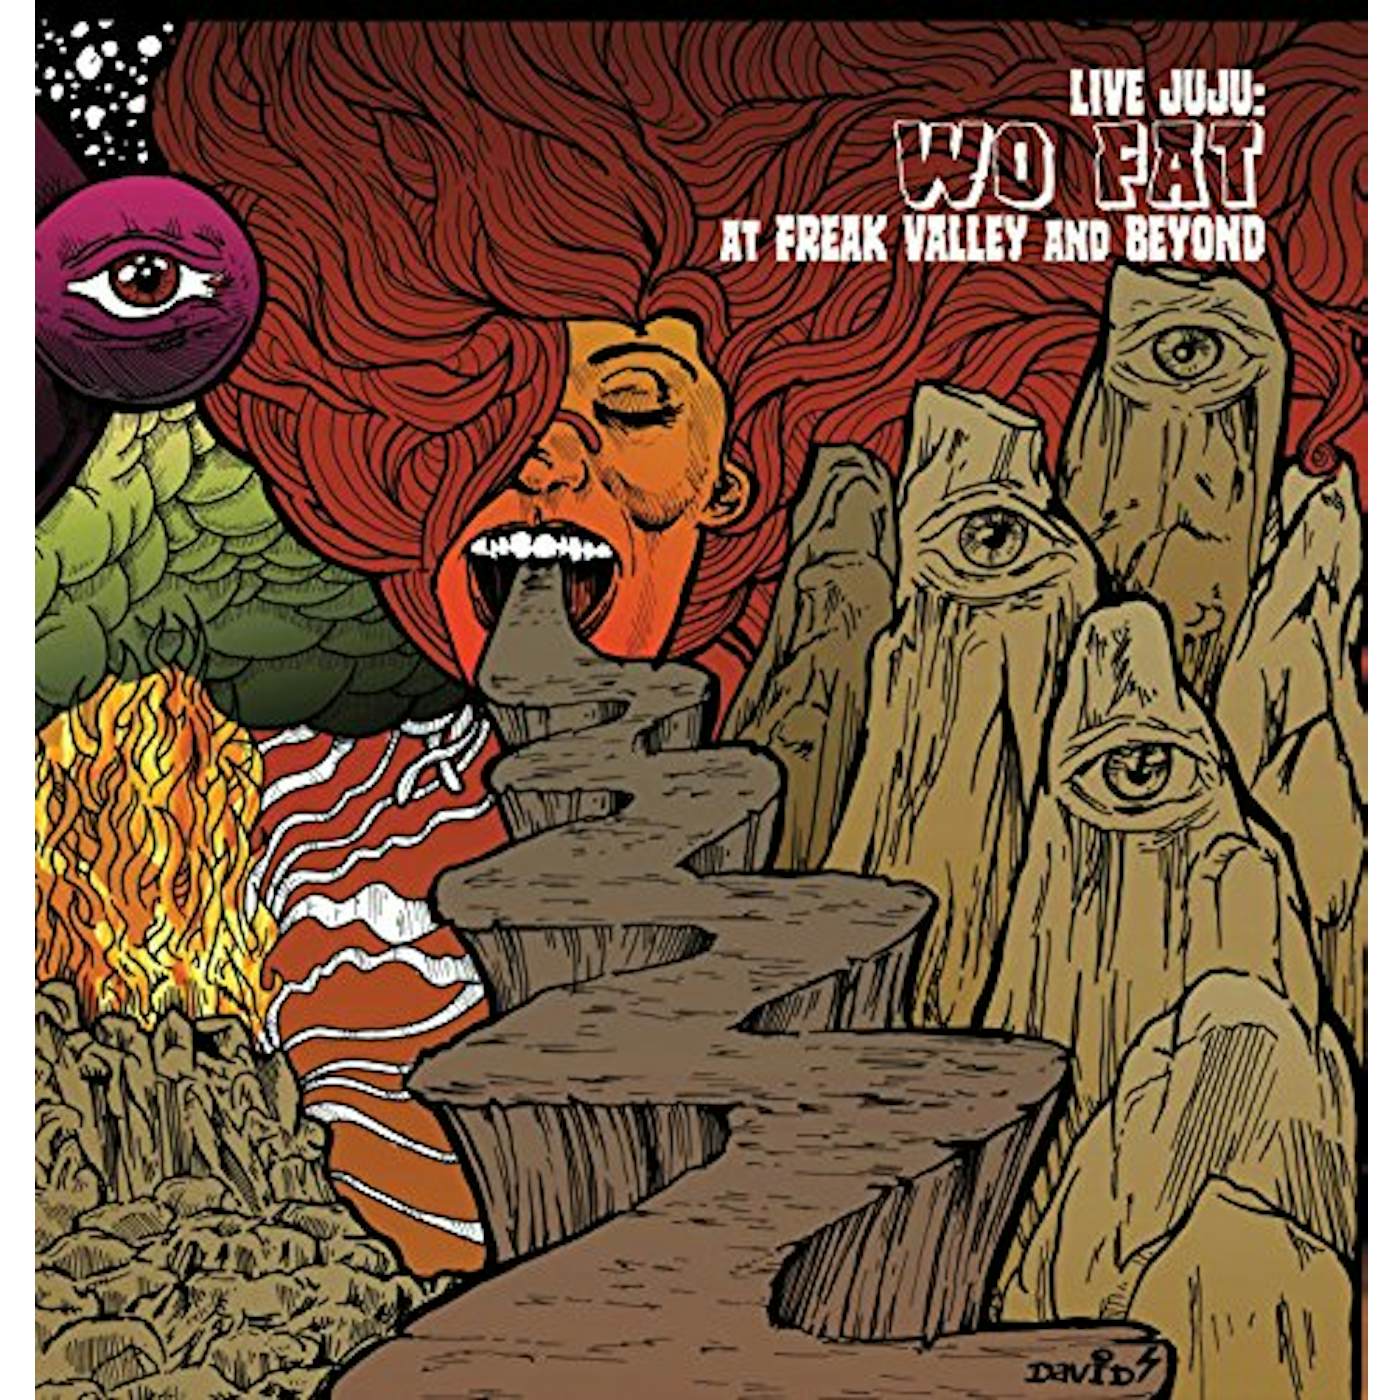 Wo Fat Live Juju: Freak Valley And Beyond Vinyl Record